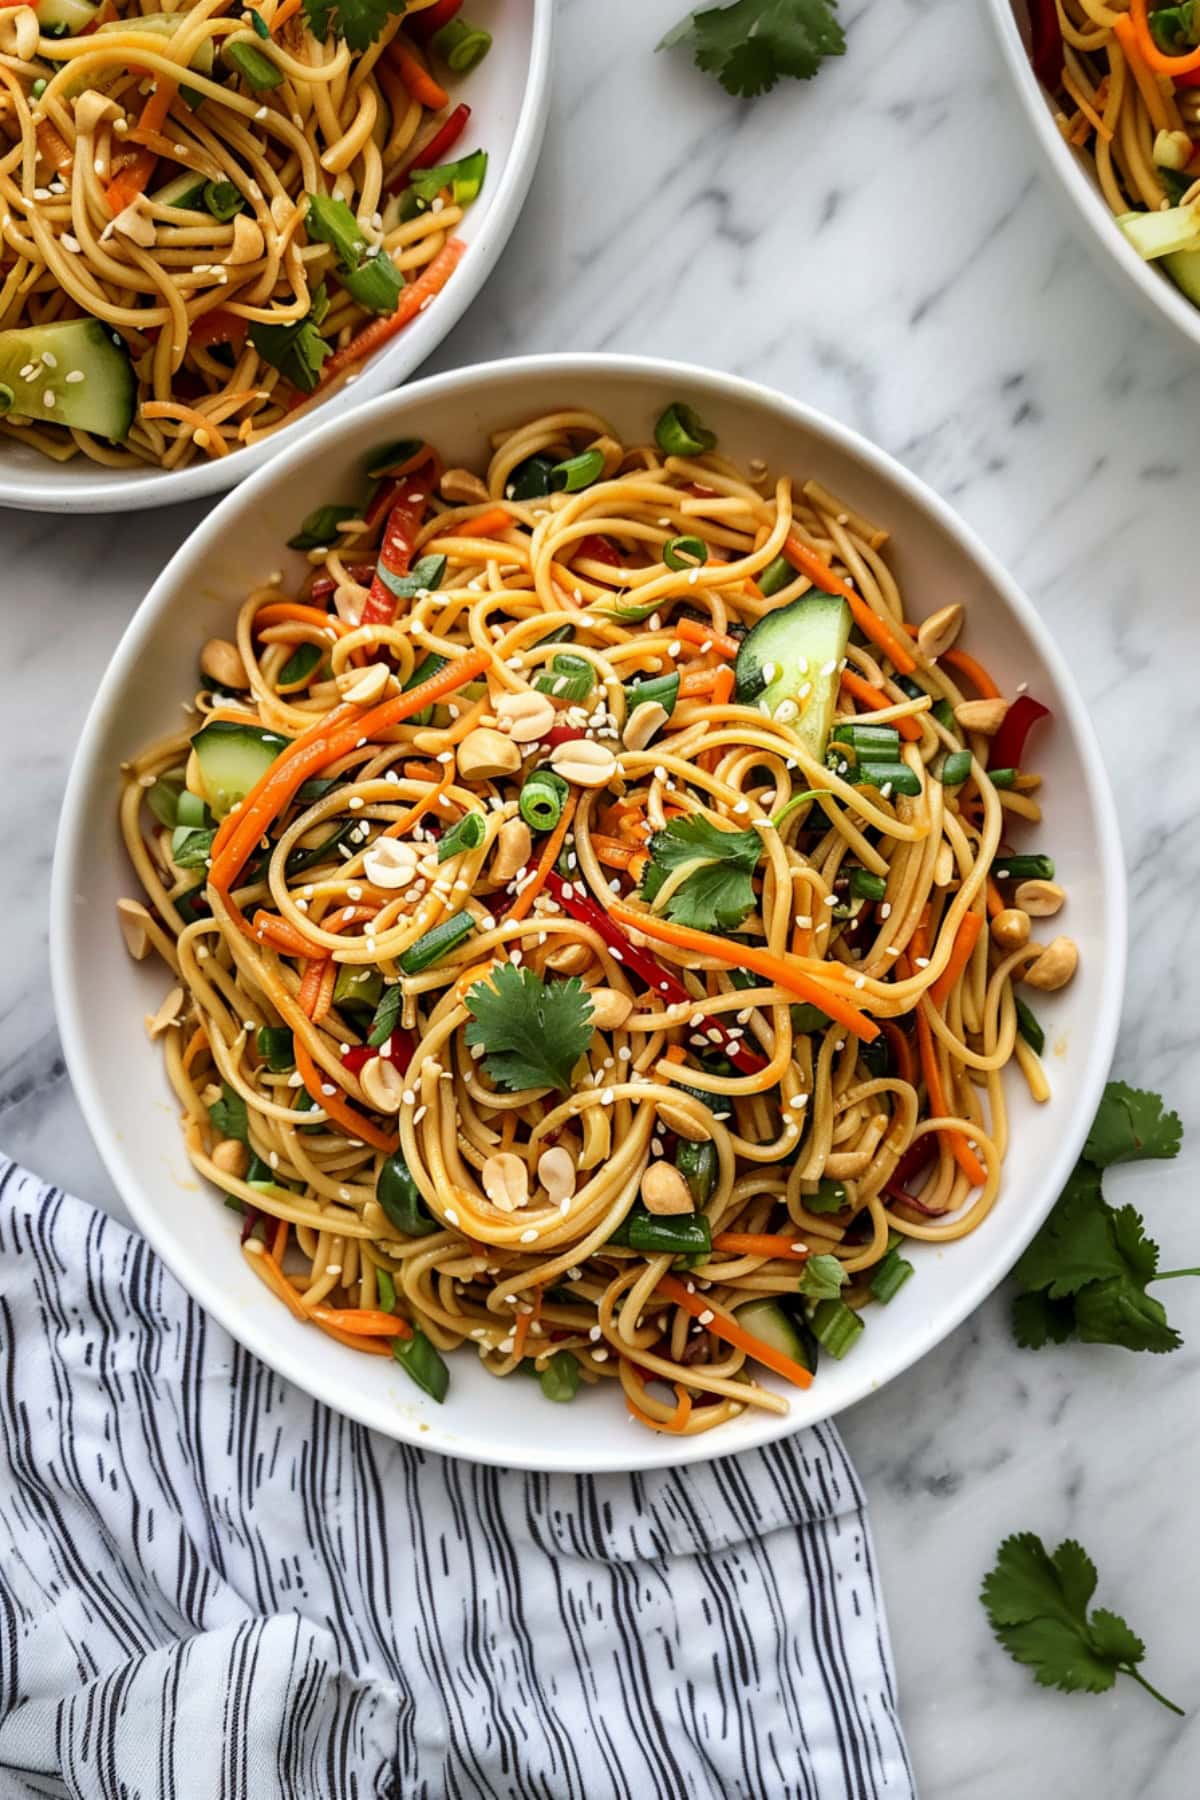 Vibrant Asian Noodle Salad with carrots, peanuts, sesame seeds, cucumbers andbell peppers.